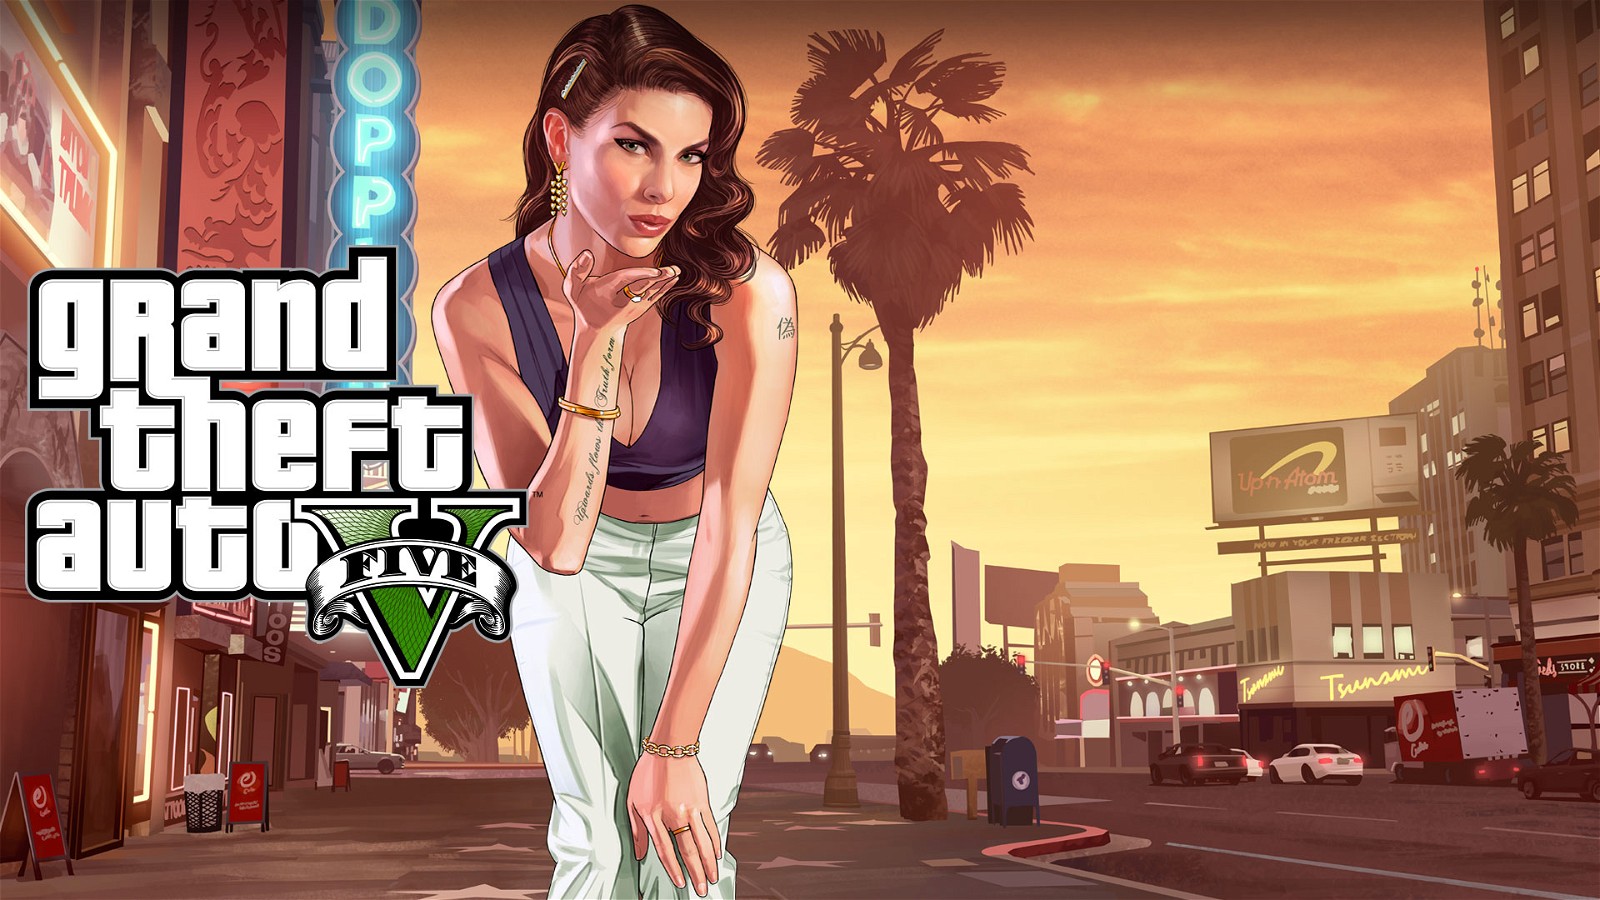 GTA 5 - The Latest Release in the Series (Codename was Rush)